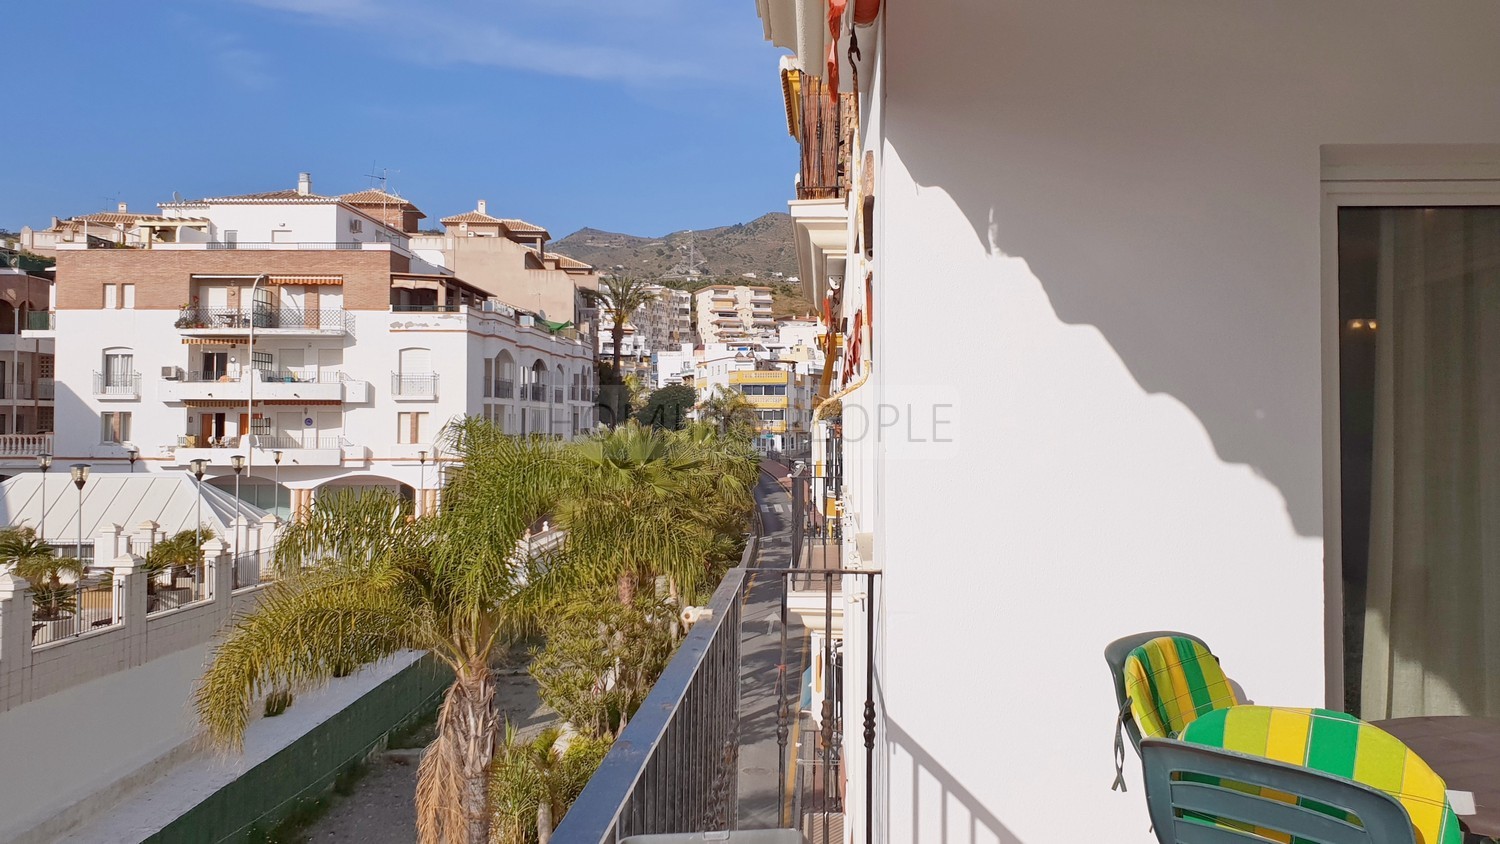 [RENTED OUT]: Bright and good quality flat: Spacious and close to the beach and shops.